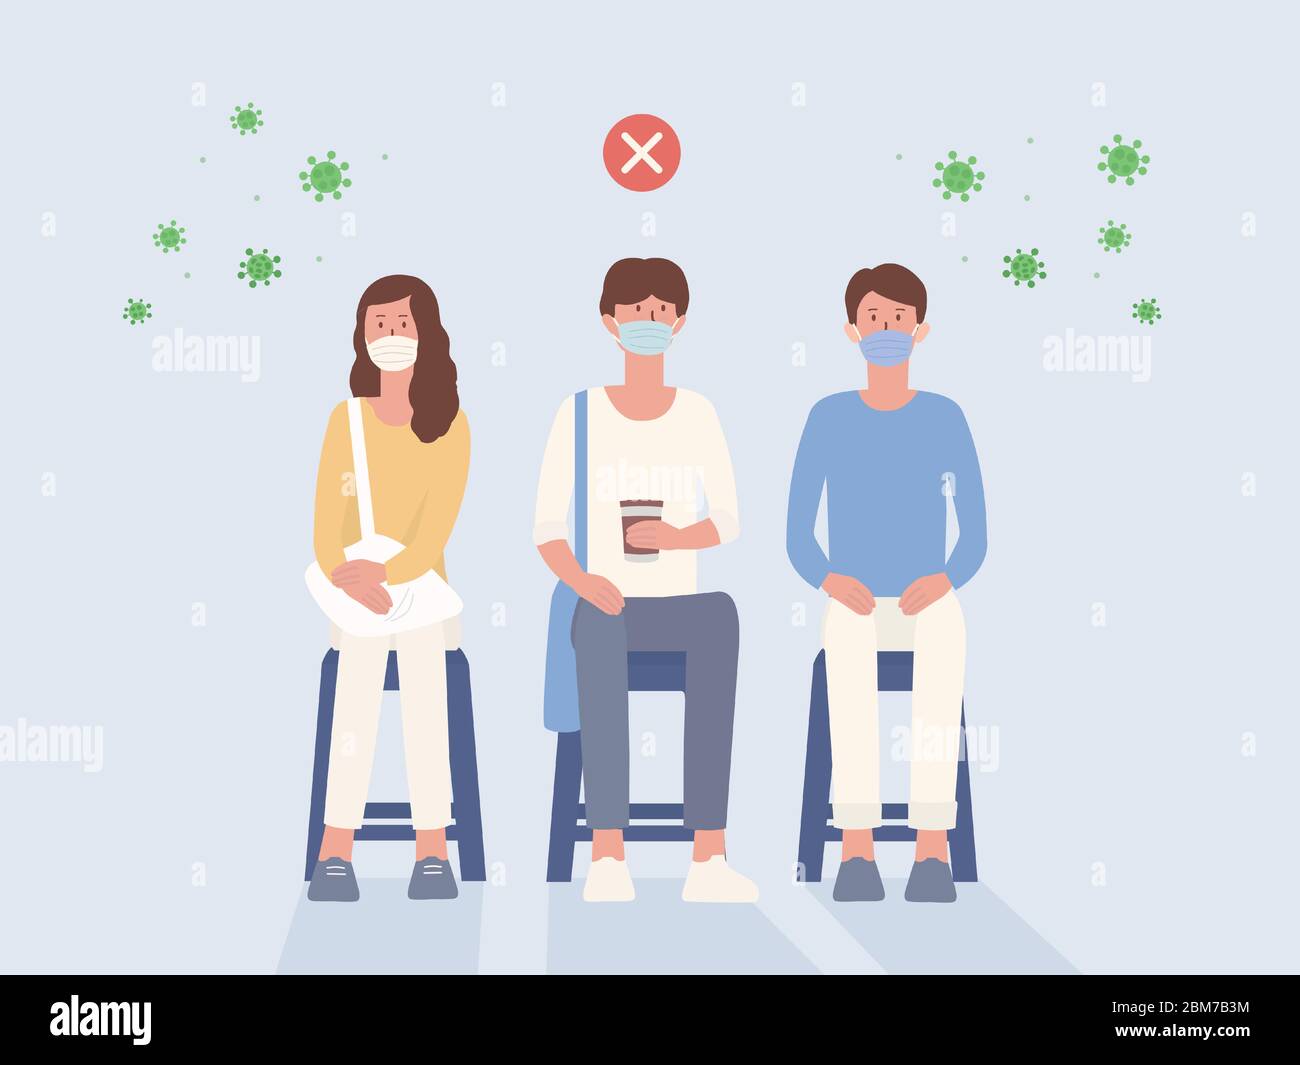 Peoples wear a surgical mask sitting on a chair close to each other that not Social distancing. Illustration about the wrong way to protect your self. Stock Vector